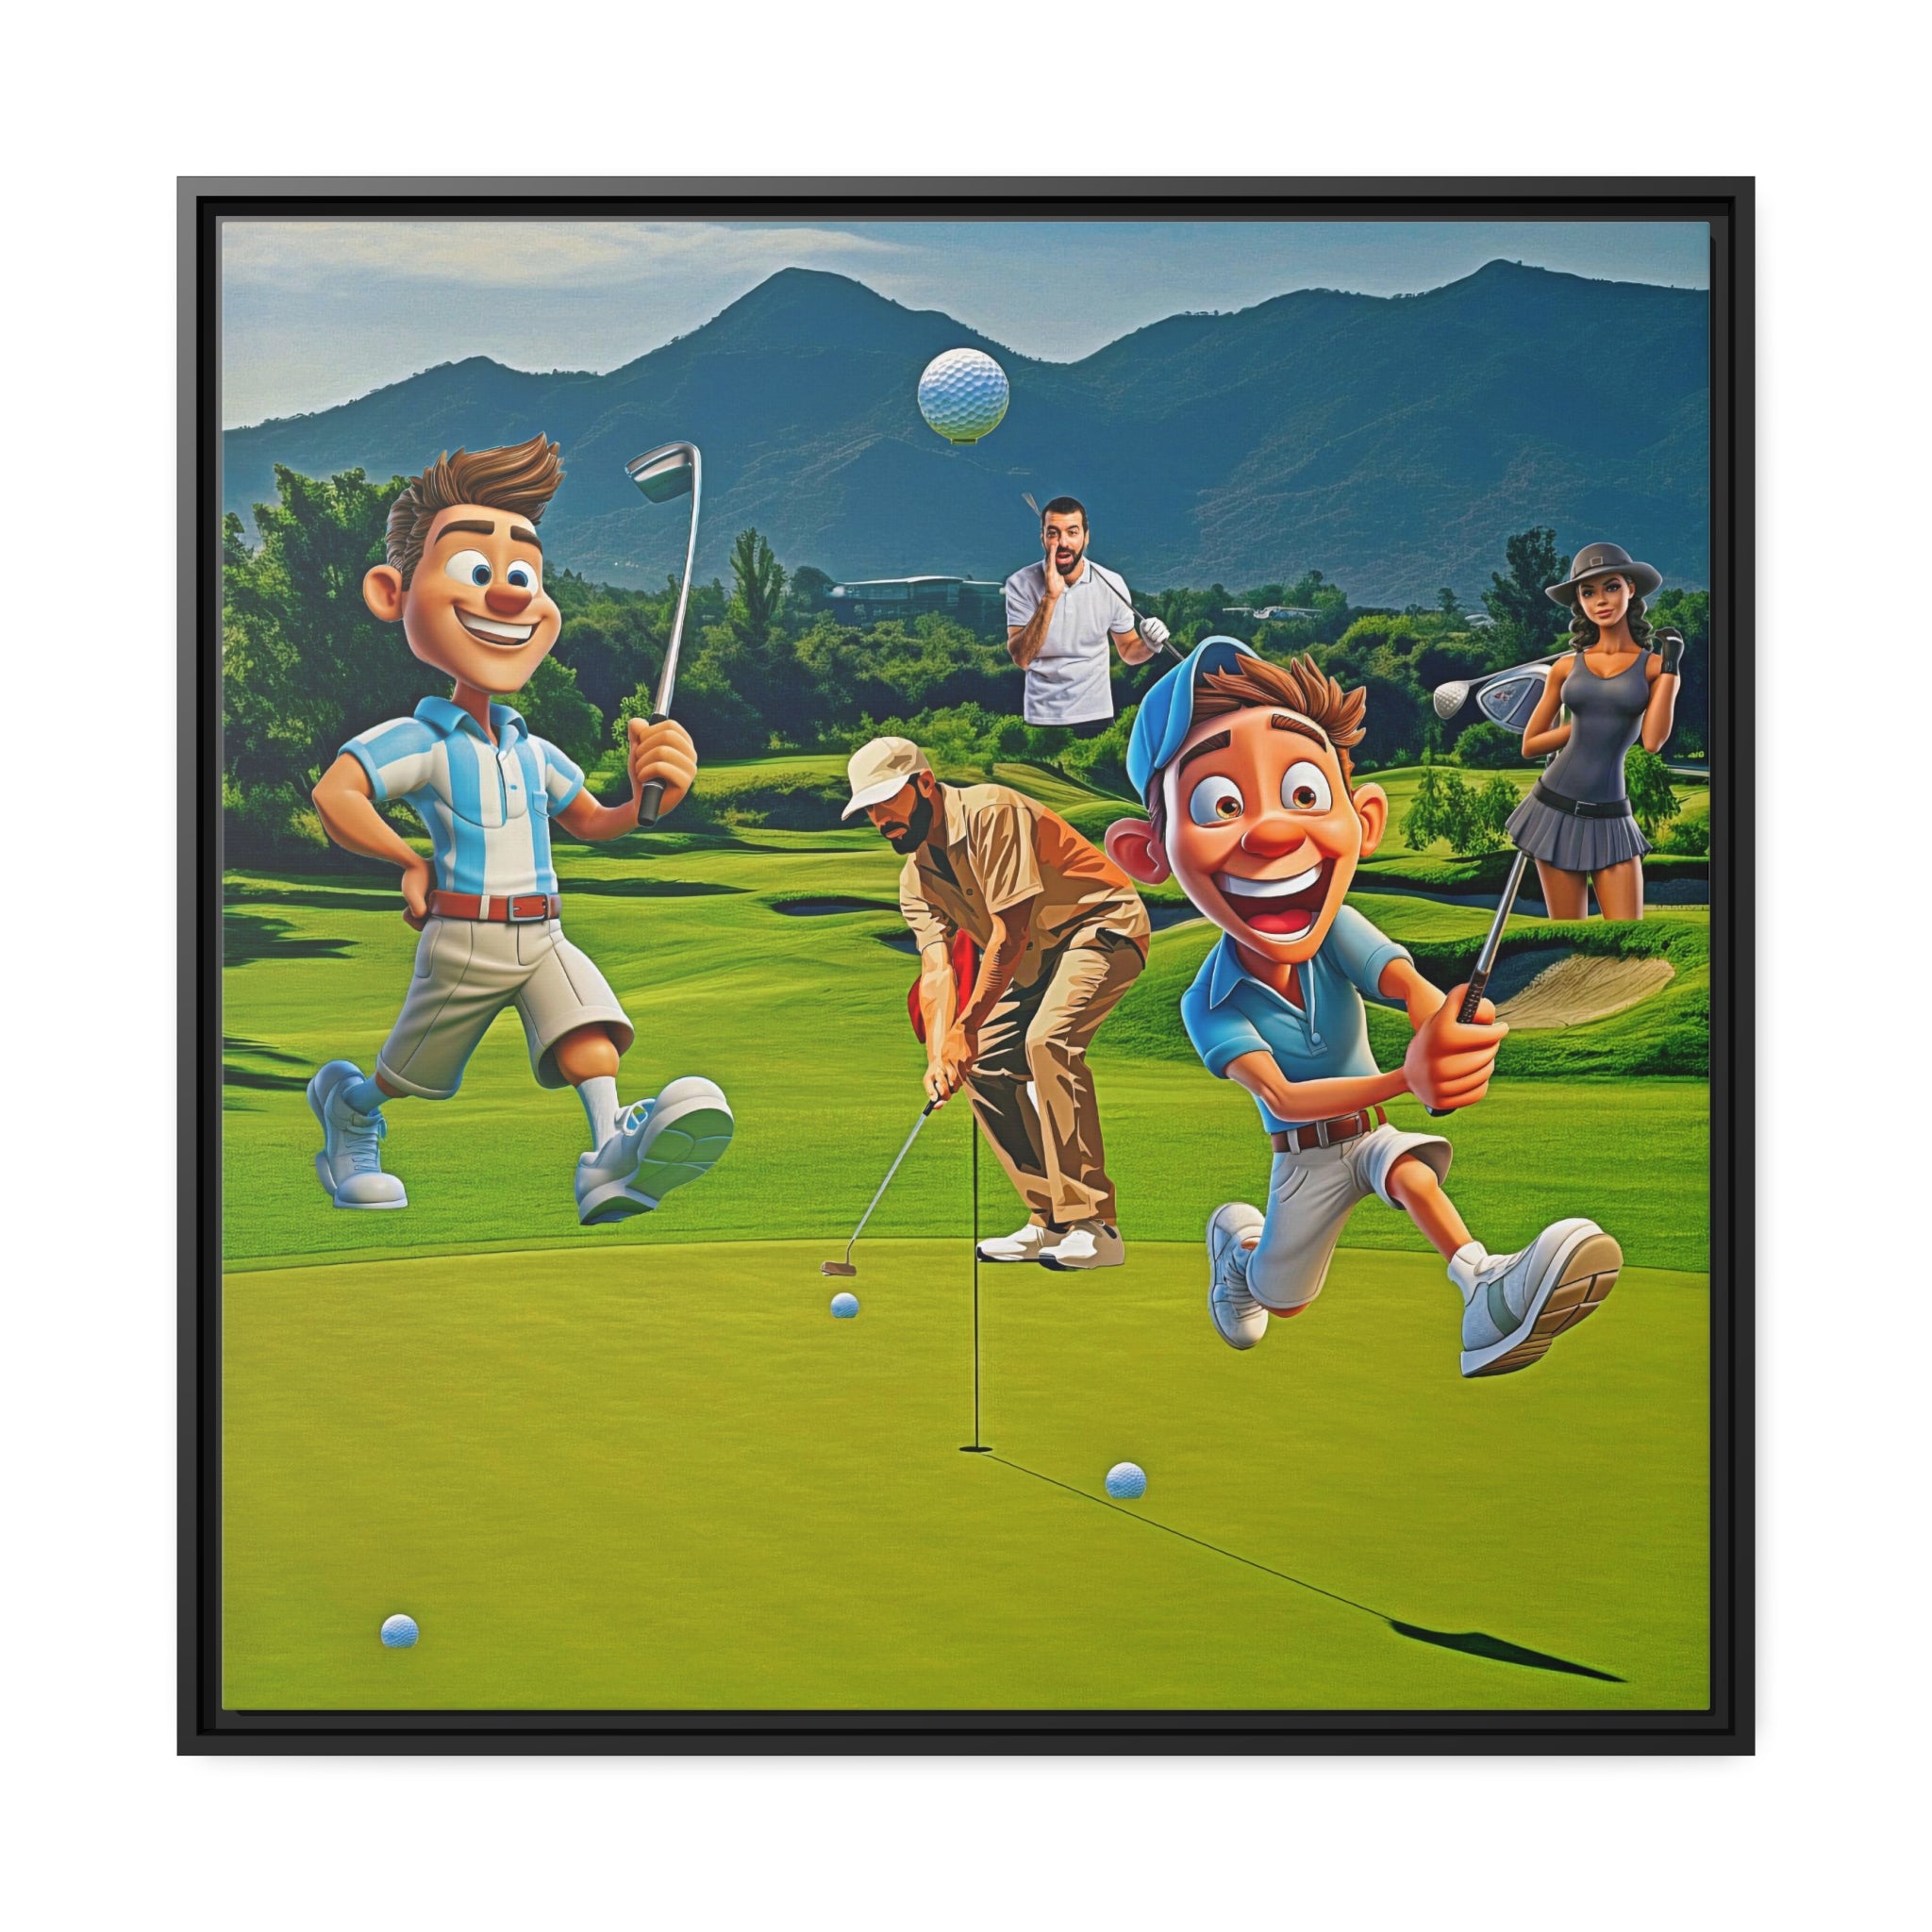 Wall Art FORE Golf Canvas Print Art Painting Original Giclee + Frame Love Nice Beauty Fun Design Fit Sport Hot House Home Office Gift Ready Hang